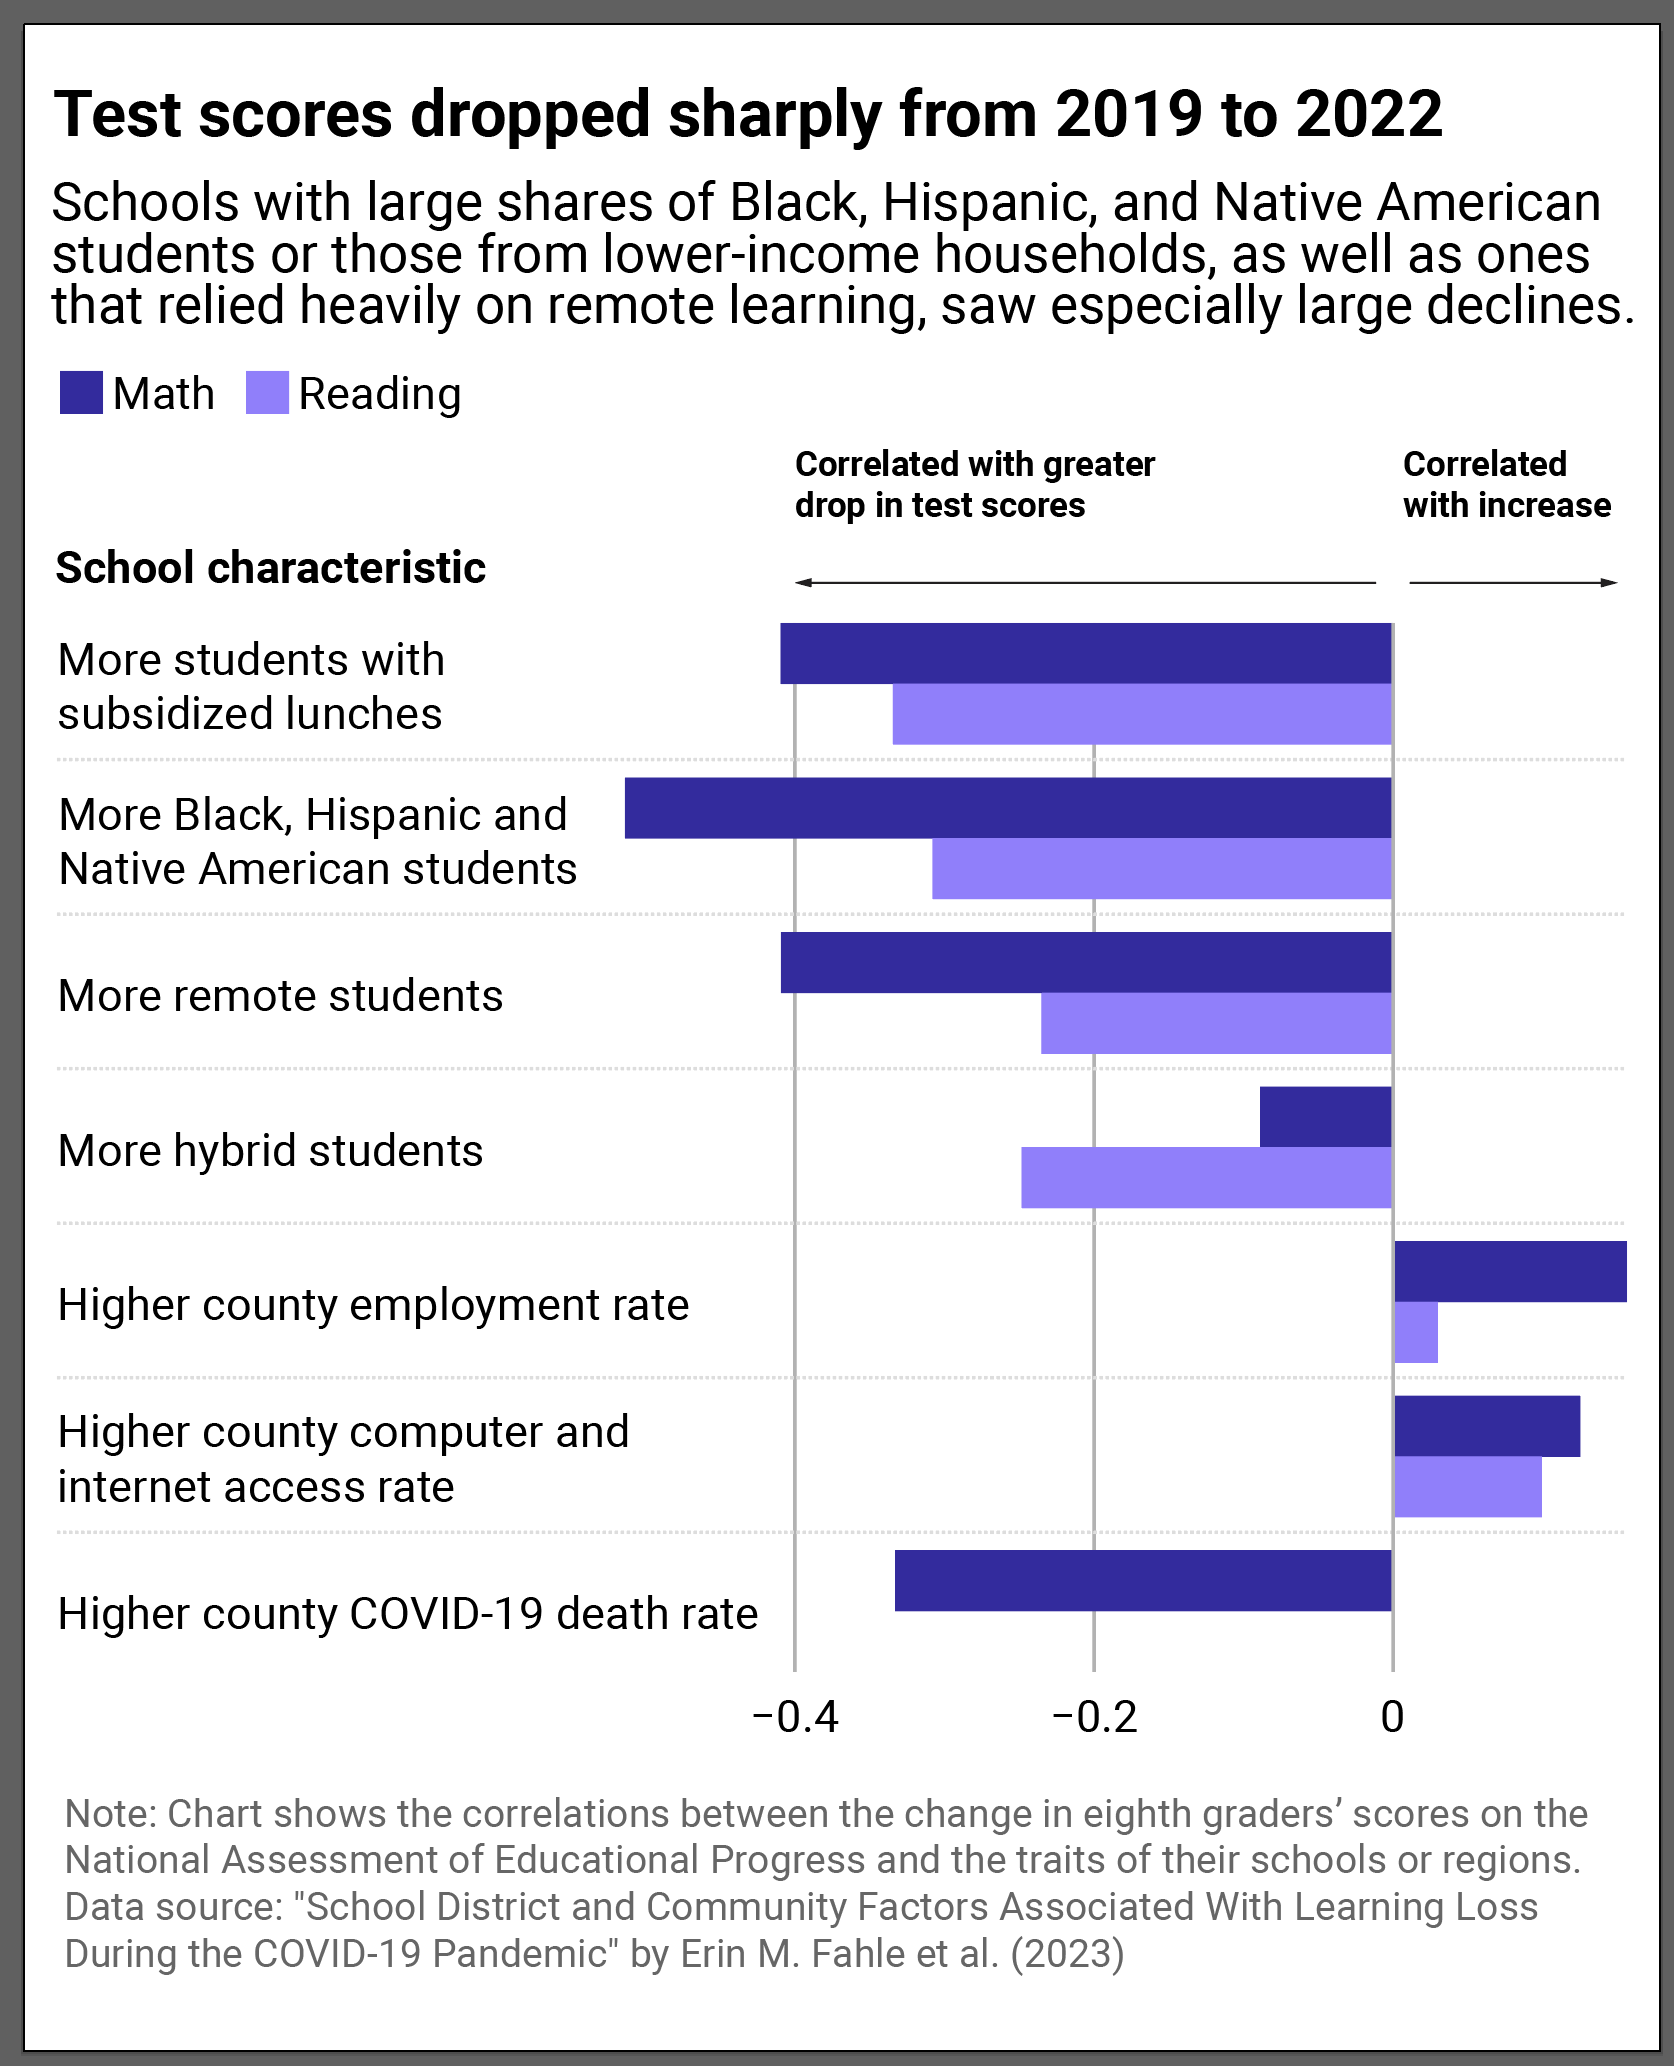 A bar chart shows the traits of schools that saw the biggest test scores decline since the pandemic. Schools with lots of students who qualified for free lunches, schools with more minority students, as well as schools that relied on remote learning fared the worst.